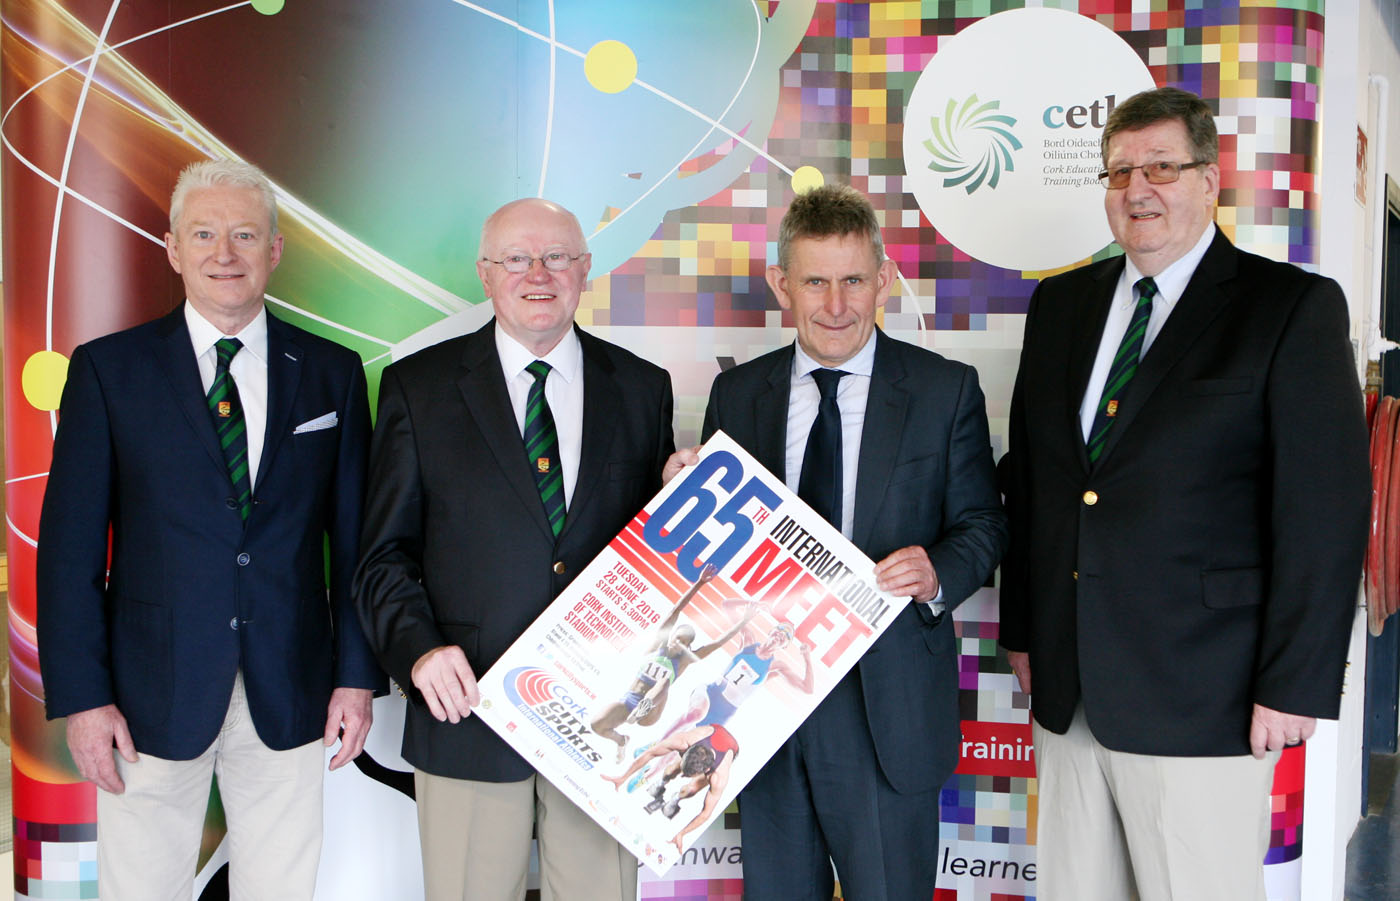 CETB Anounce Sponsorship of the !500 Junior Mens Race at the 65th Cork City Sports International Athletics Meeting on Tuesday Evening the 28th June next at CIT Athletics Stadium. L to R., Joe Hartnett, Meeting Director CCS, Tony O'Connell Chairman CCS. Ted Owens CEO CETB and Terry O'Rourke Secretary CCS. Picture, Europhoto.